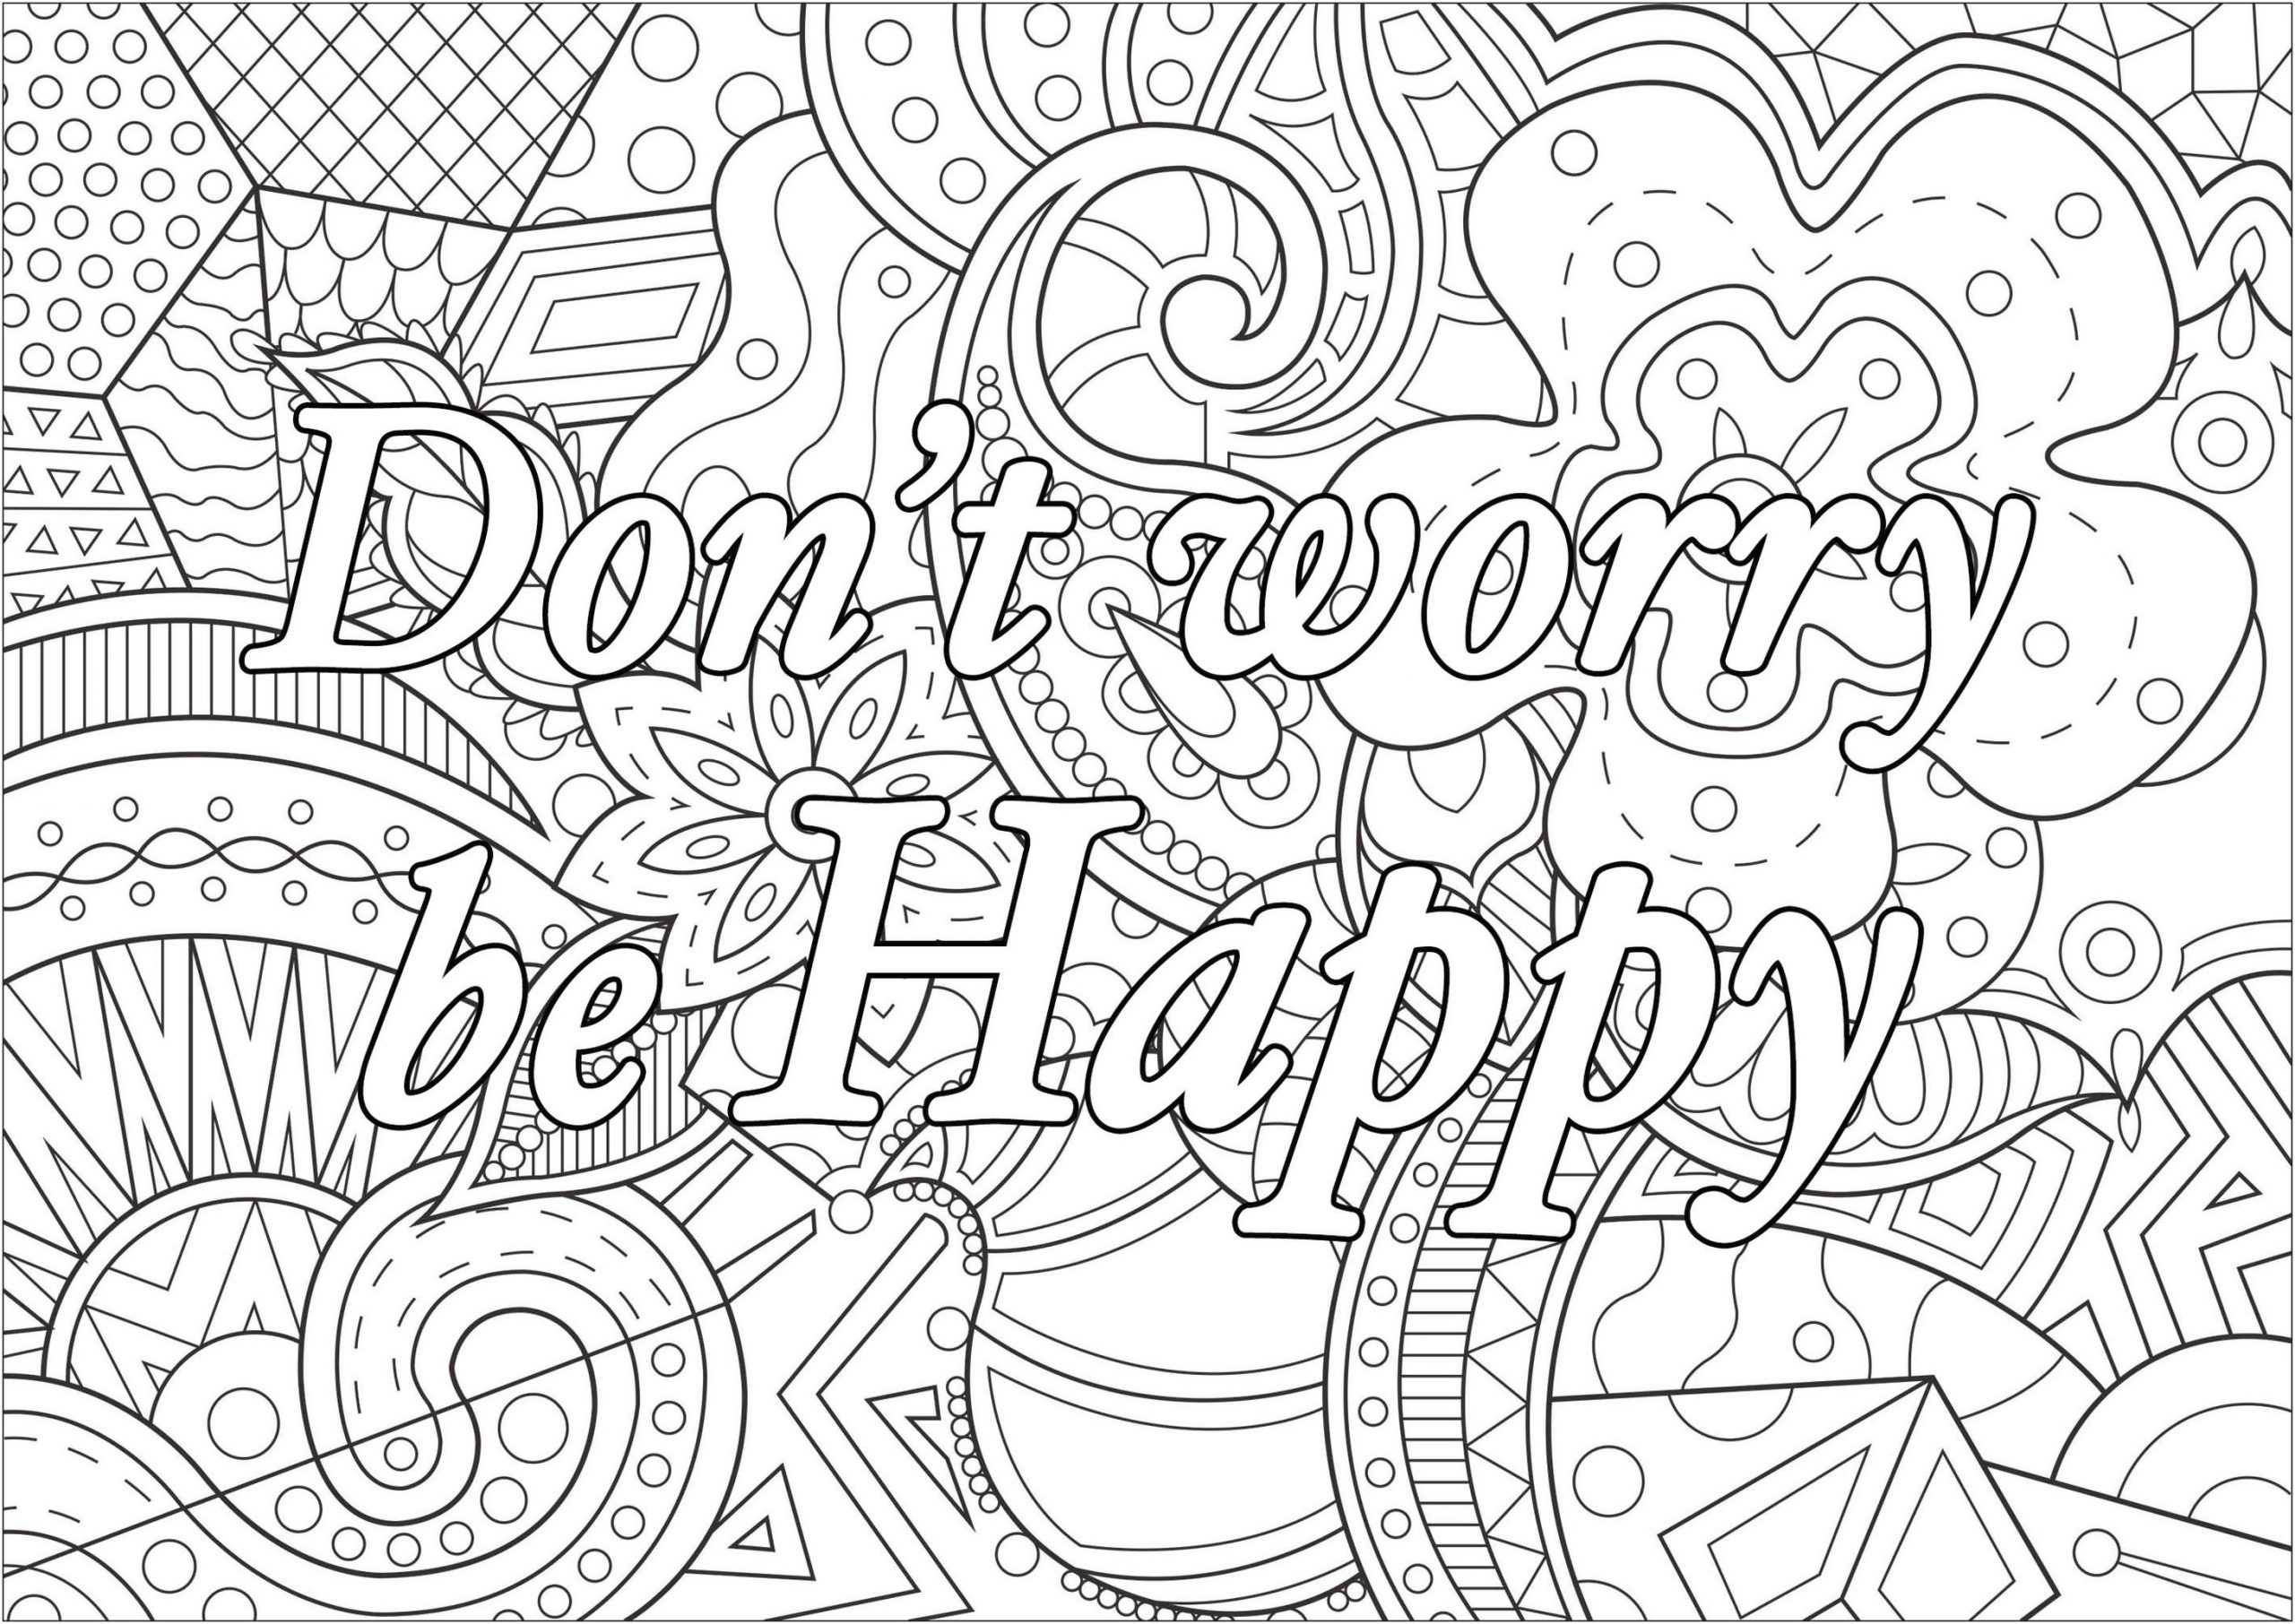 Get This Printable Adult Coloring Pages Quotes Be Happy 